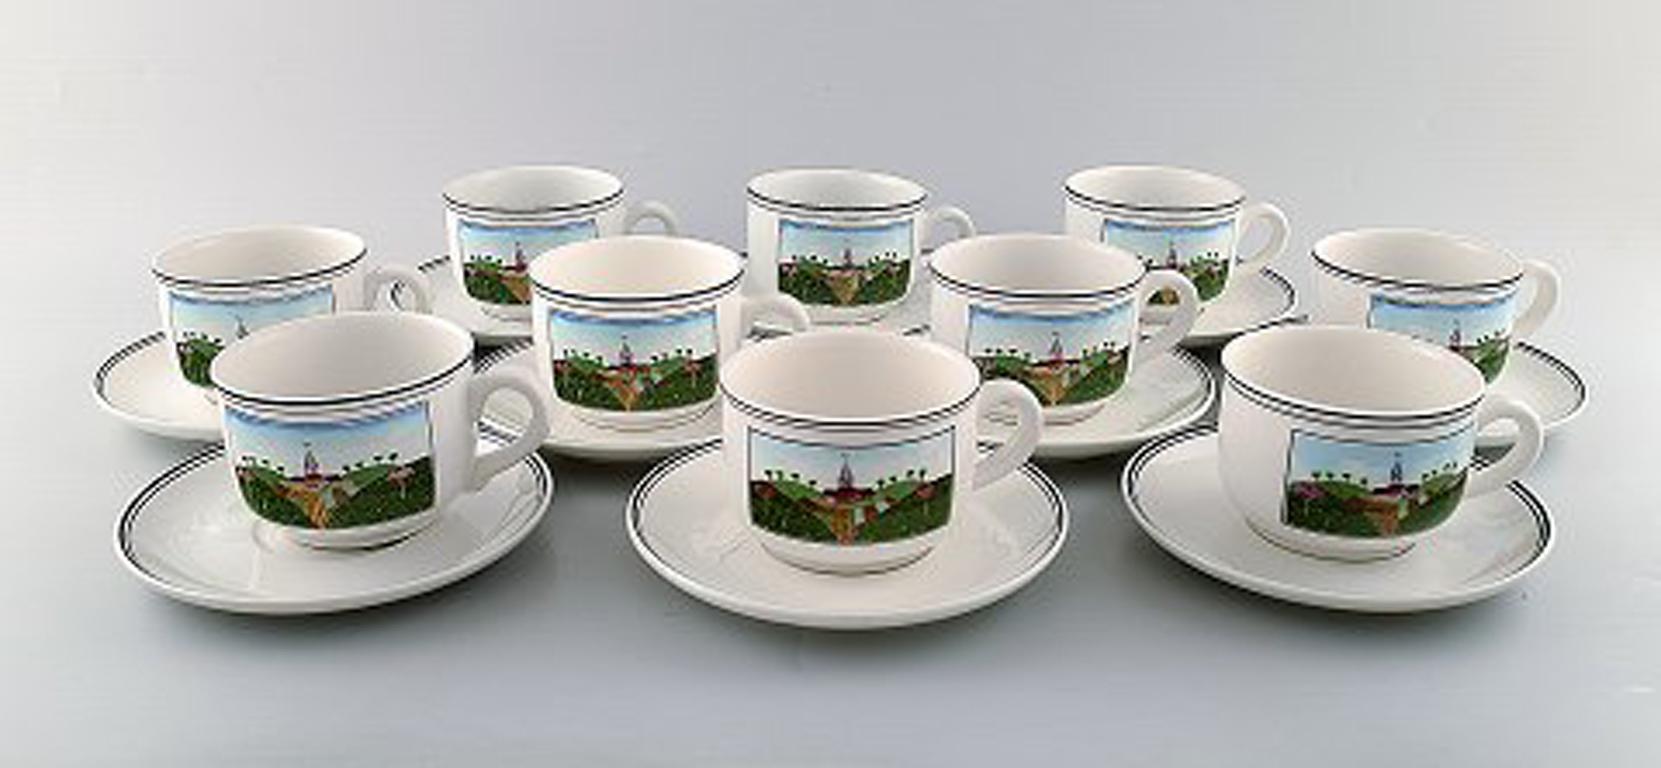 Villeroy & Boch Naif coffee service in porcelain. A set of 10 large cups with saucers decorated with naivist village motif.
In very good condition.
Stamped.
Measures: 8.8 x 6.5 cm.
Designed by Gérard Laplau. Motives of families, villages and